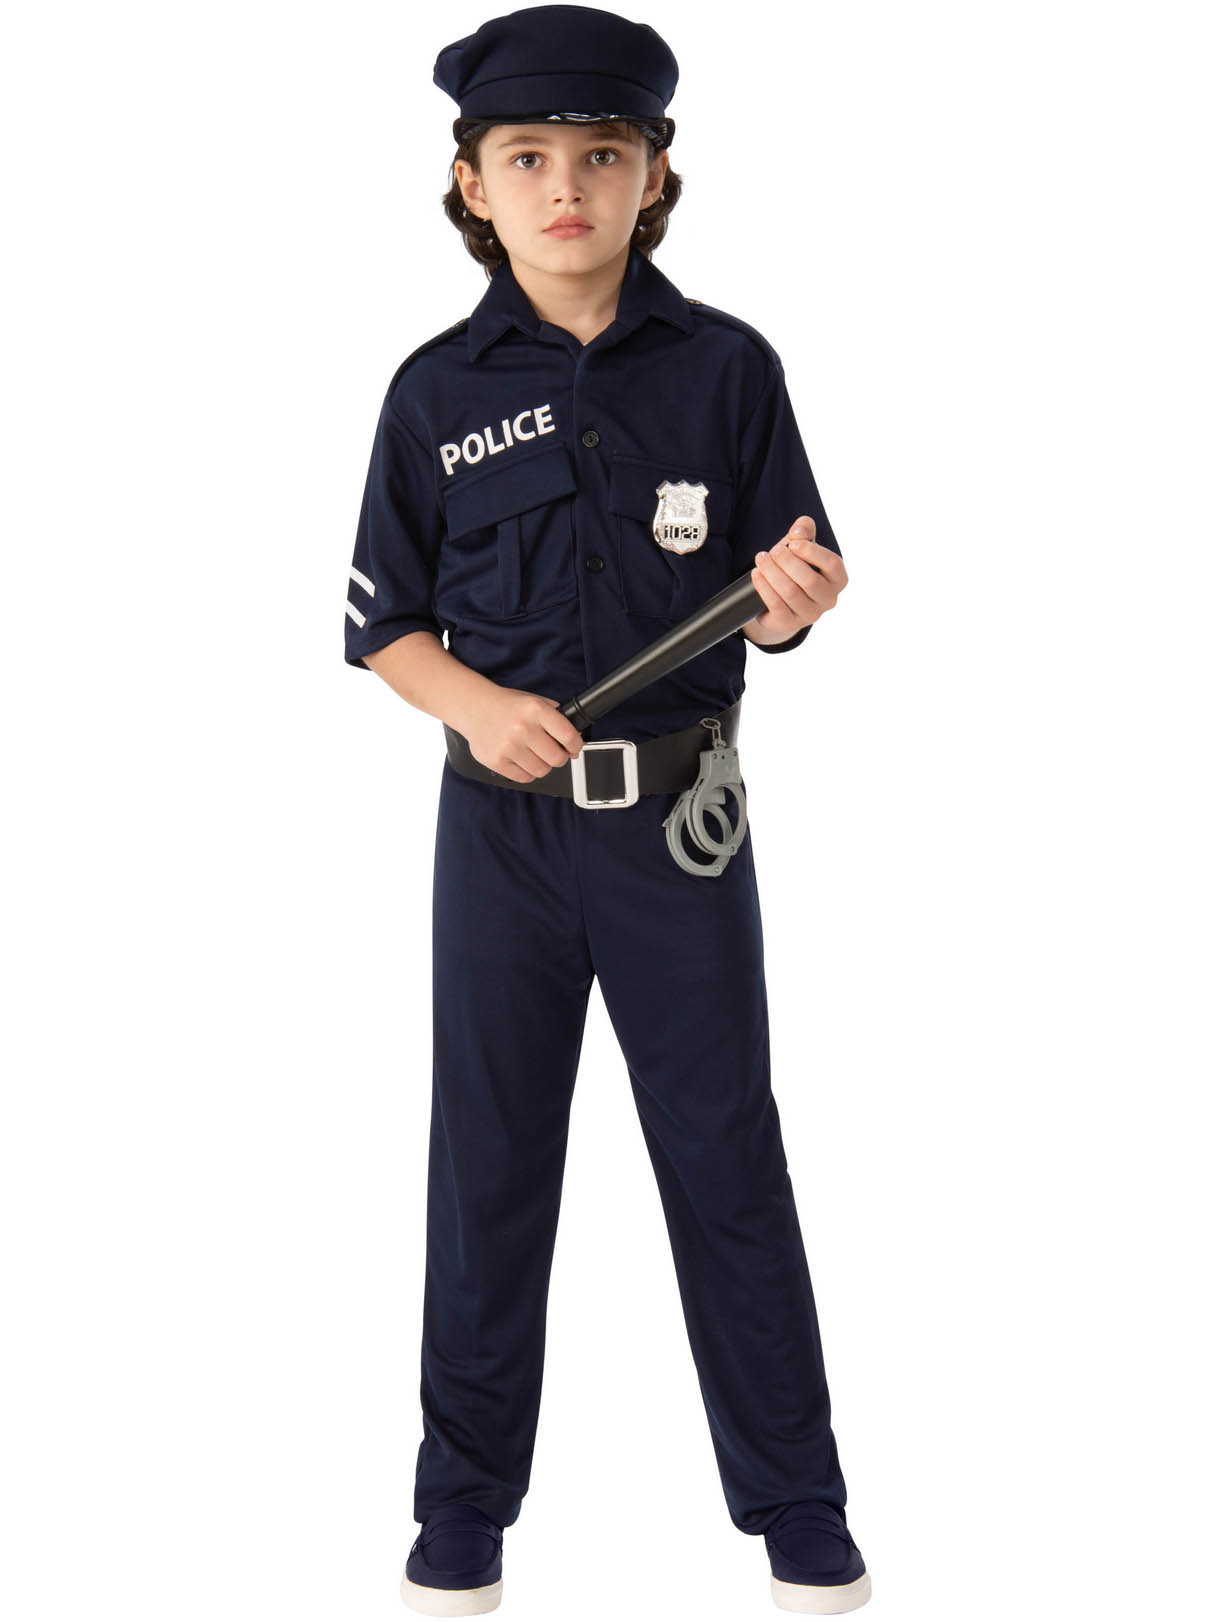 Police Child Costume - PartyBell.com